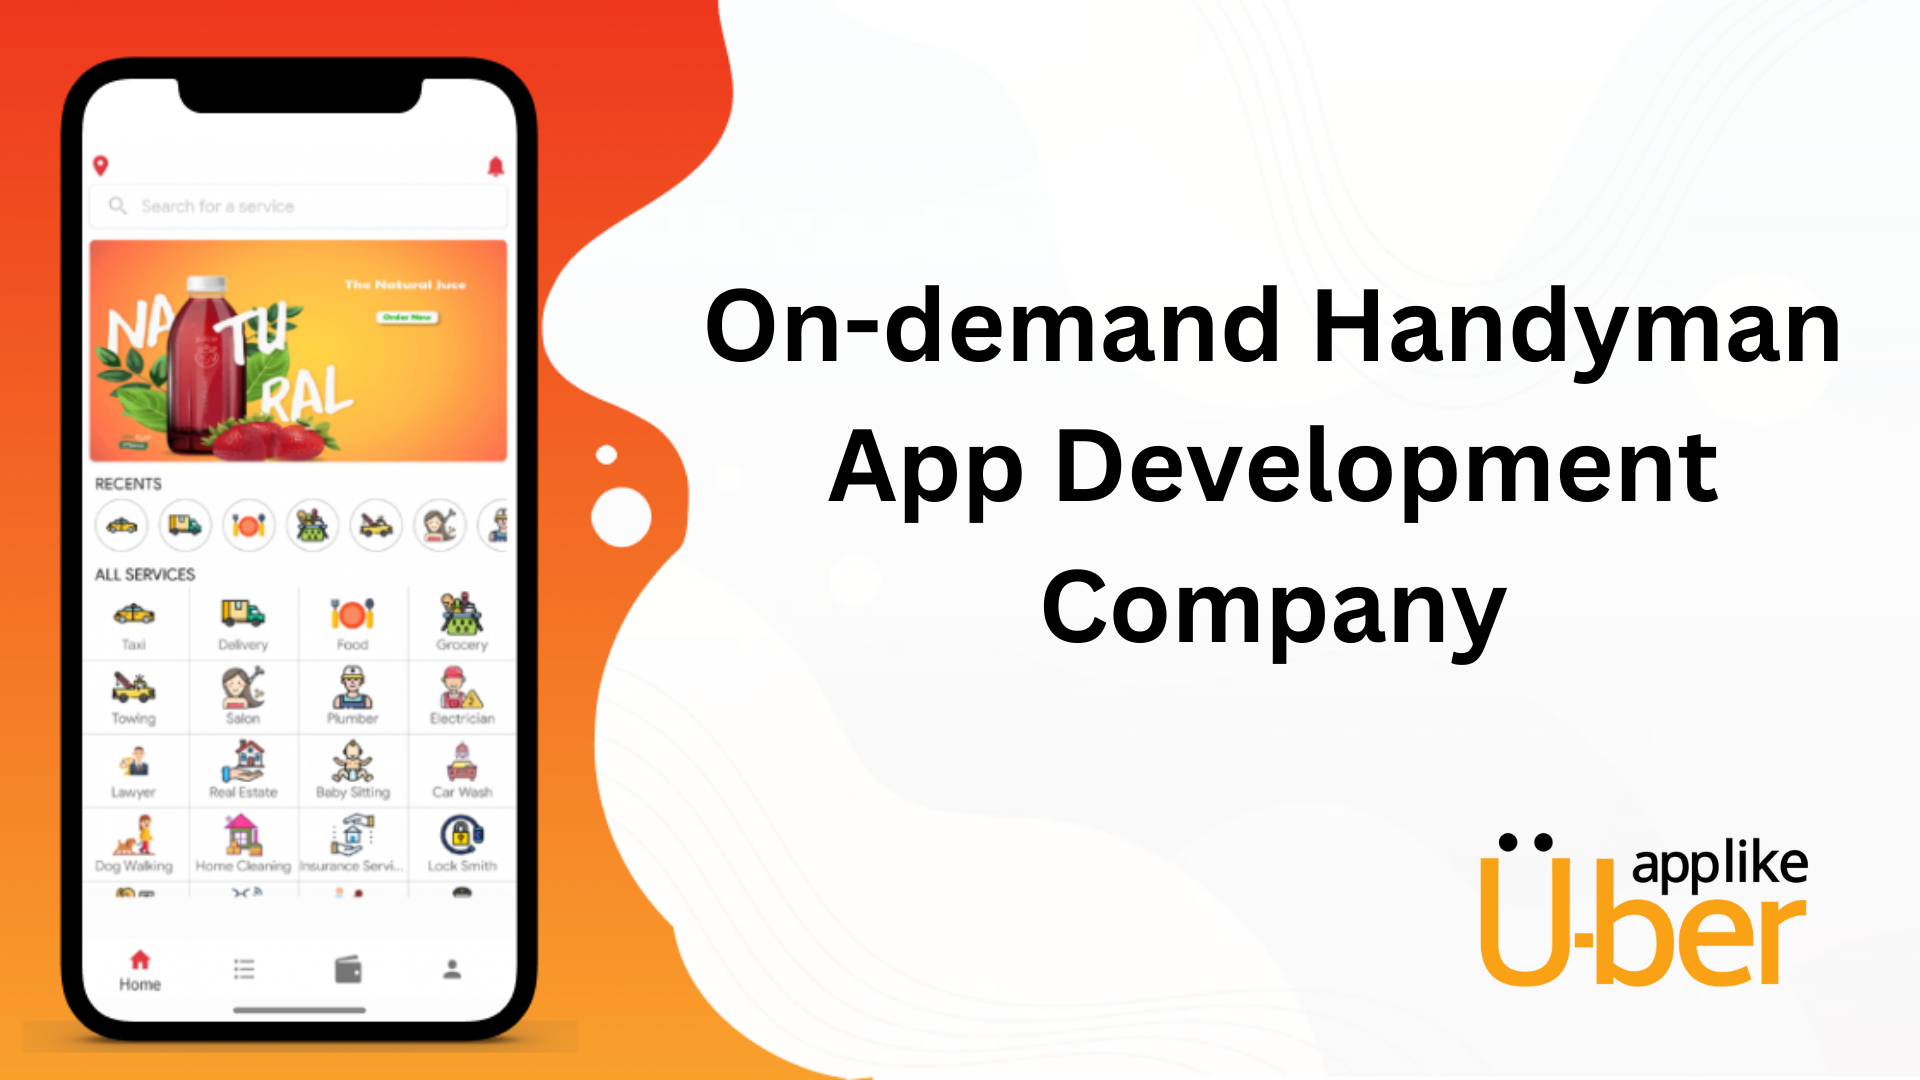 A mobile phone which is showing different products and services also an On-demand handyman app development company is written as the title of this image